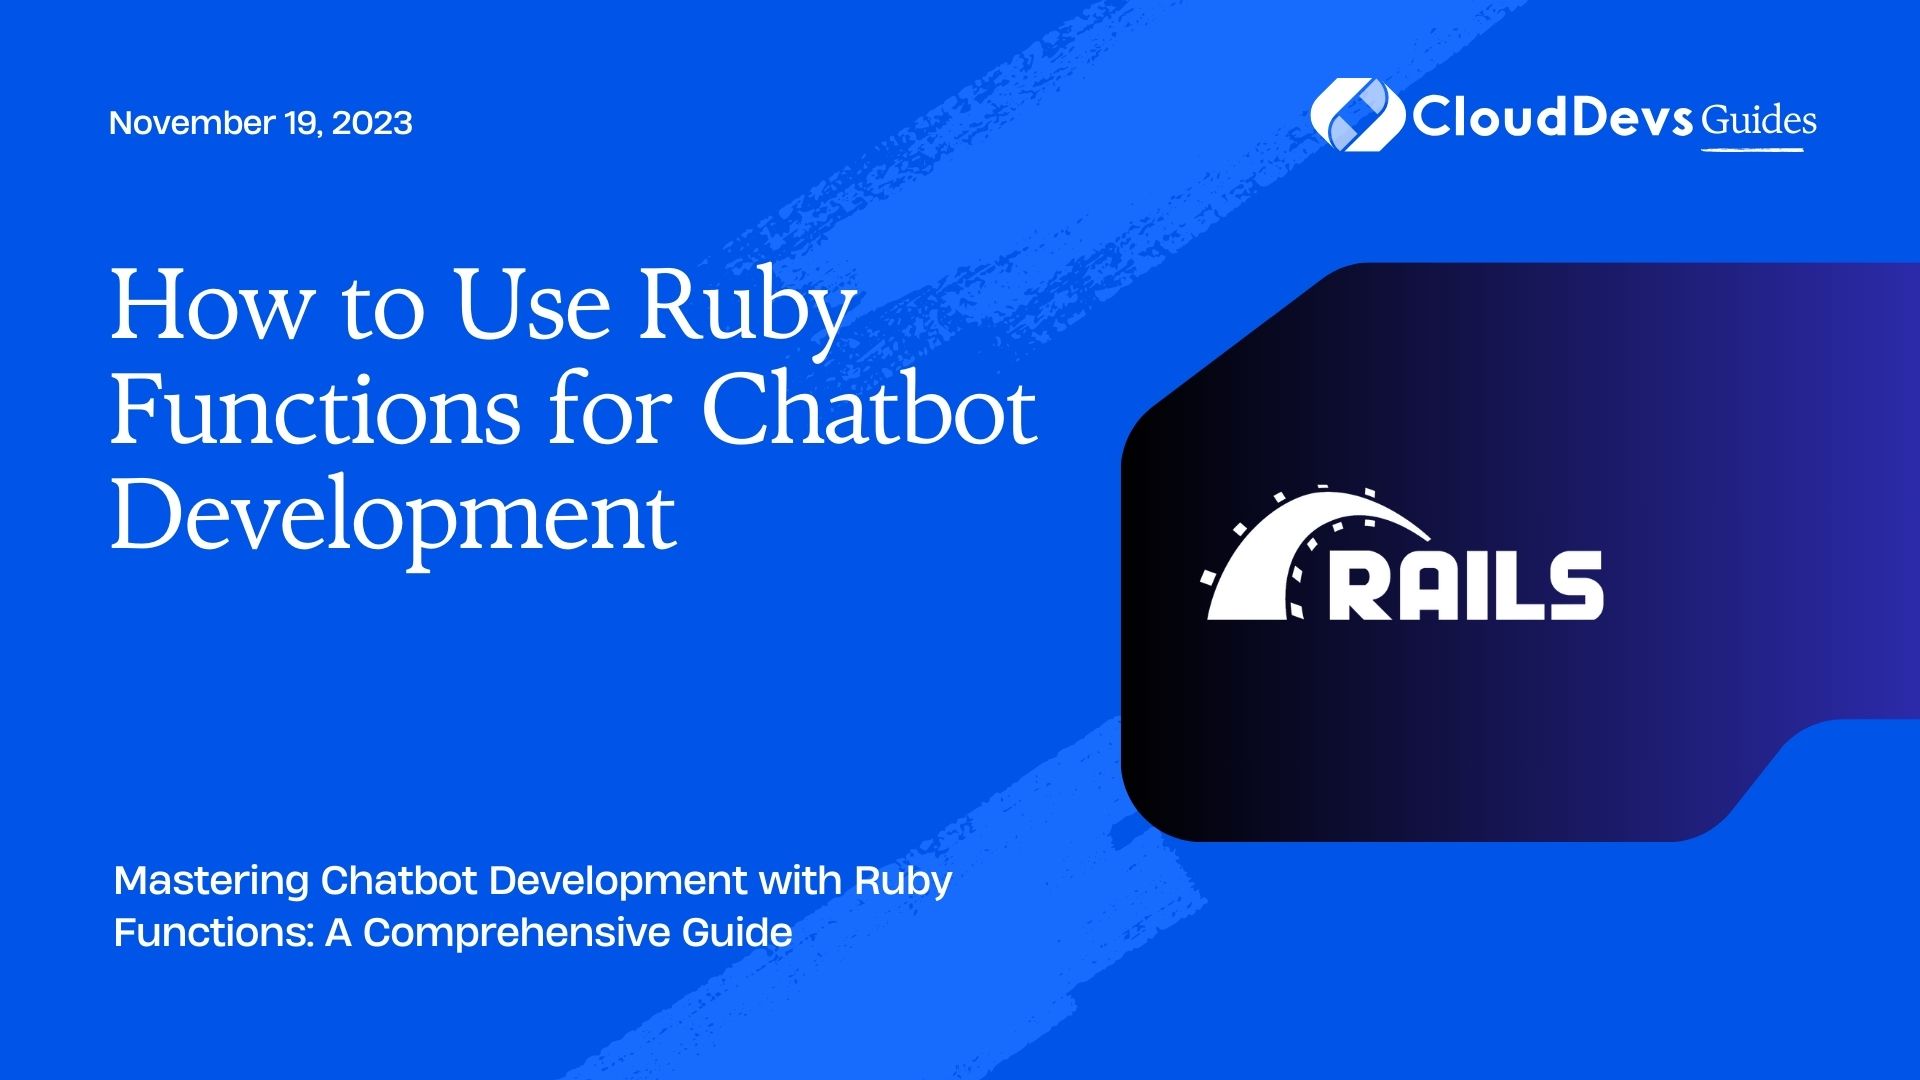 How to Use Ruby Functions for Chatbot Development